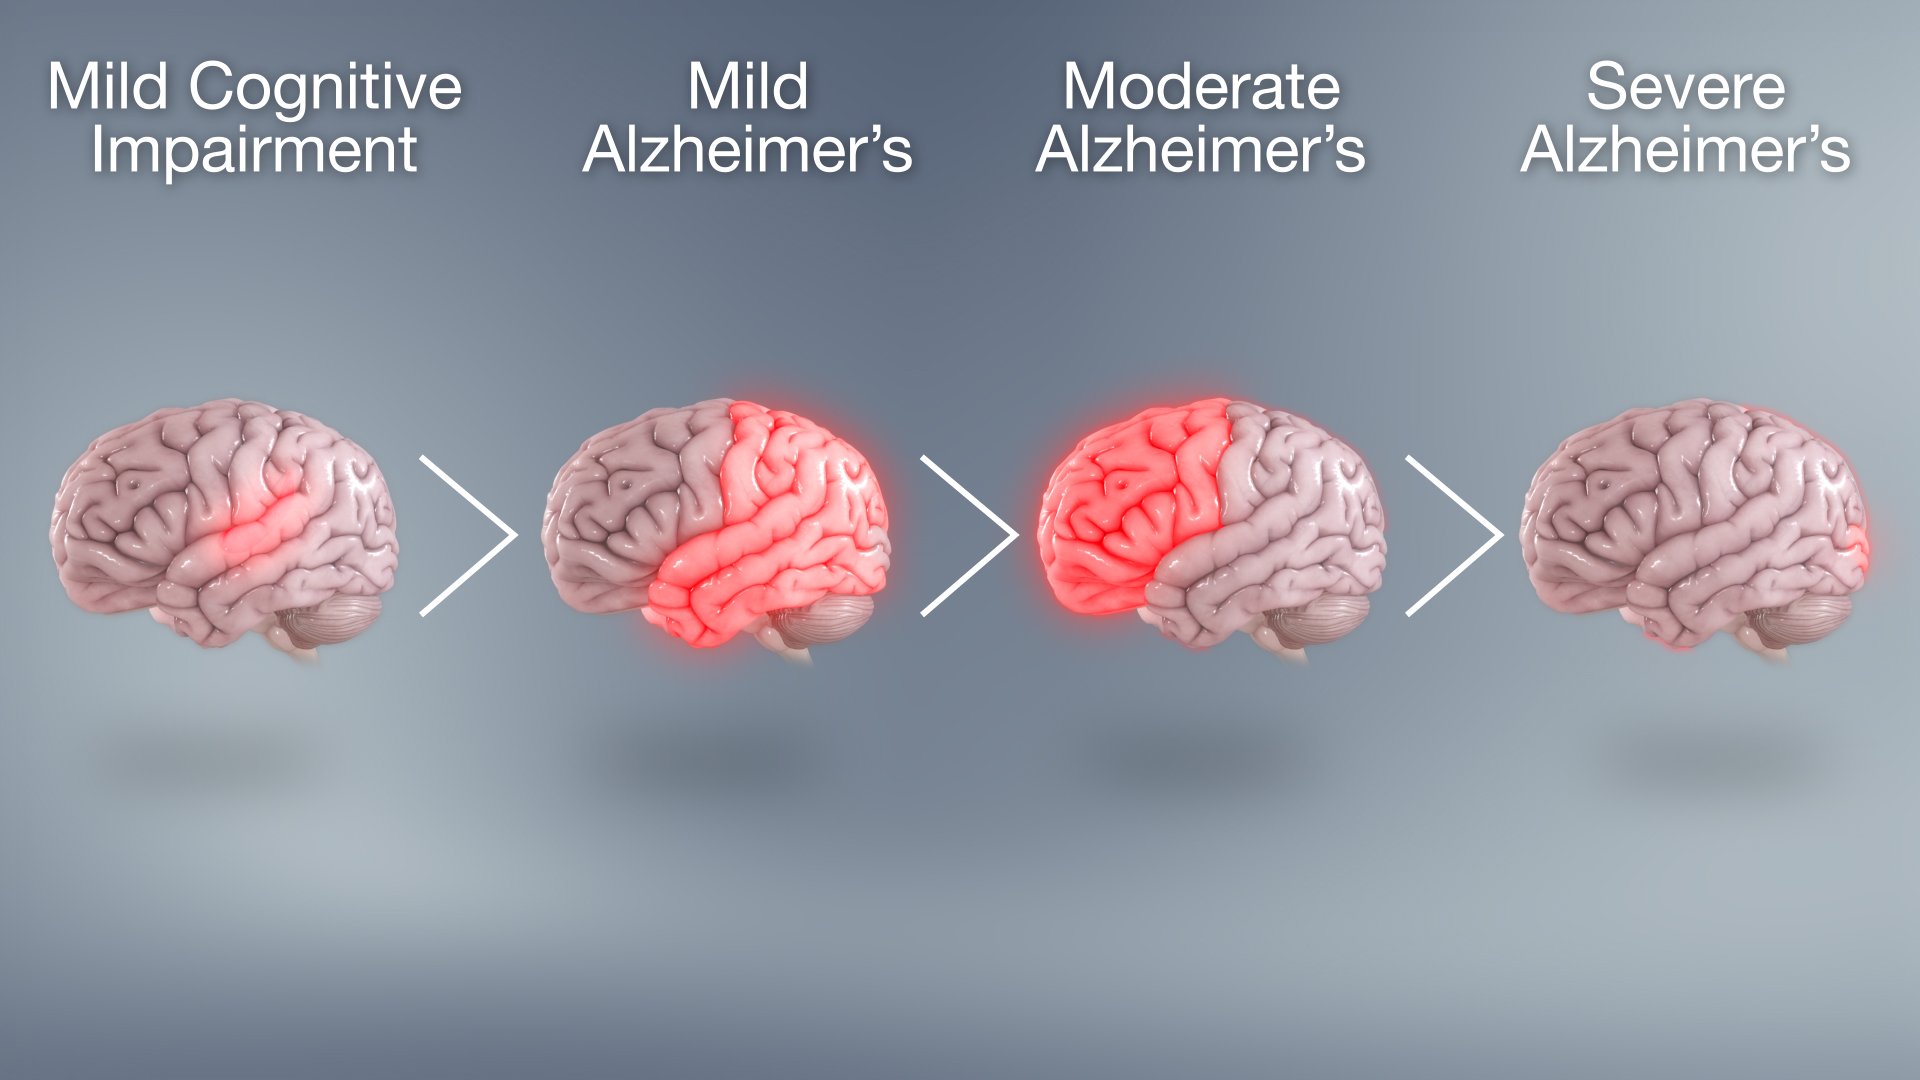 Progression of Alzheimers disease through different stages